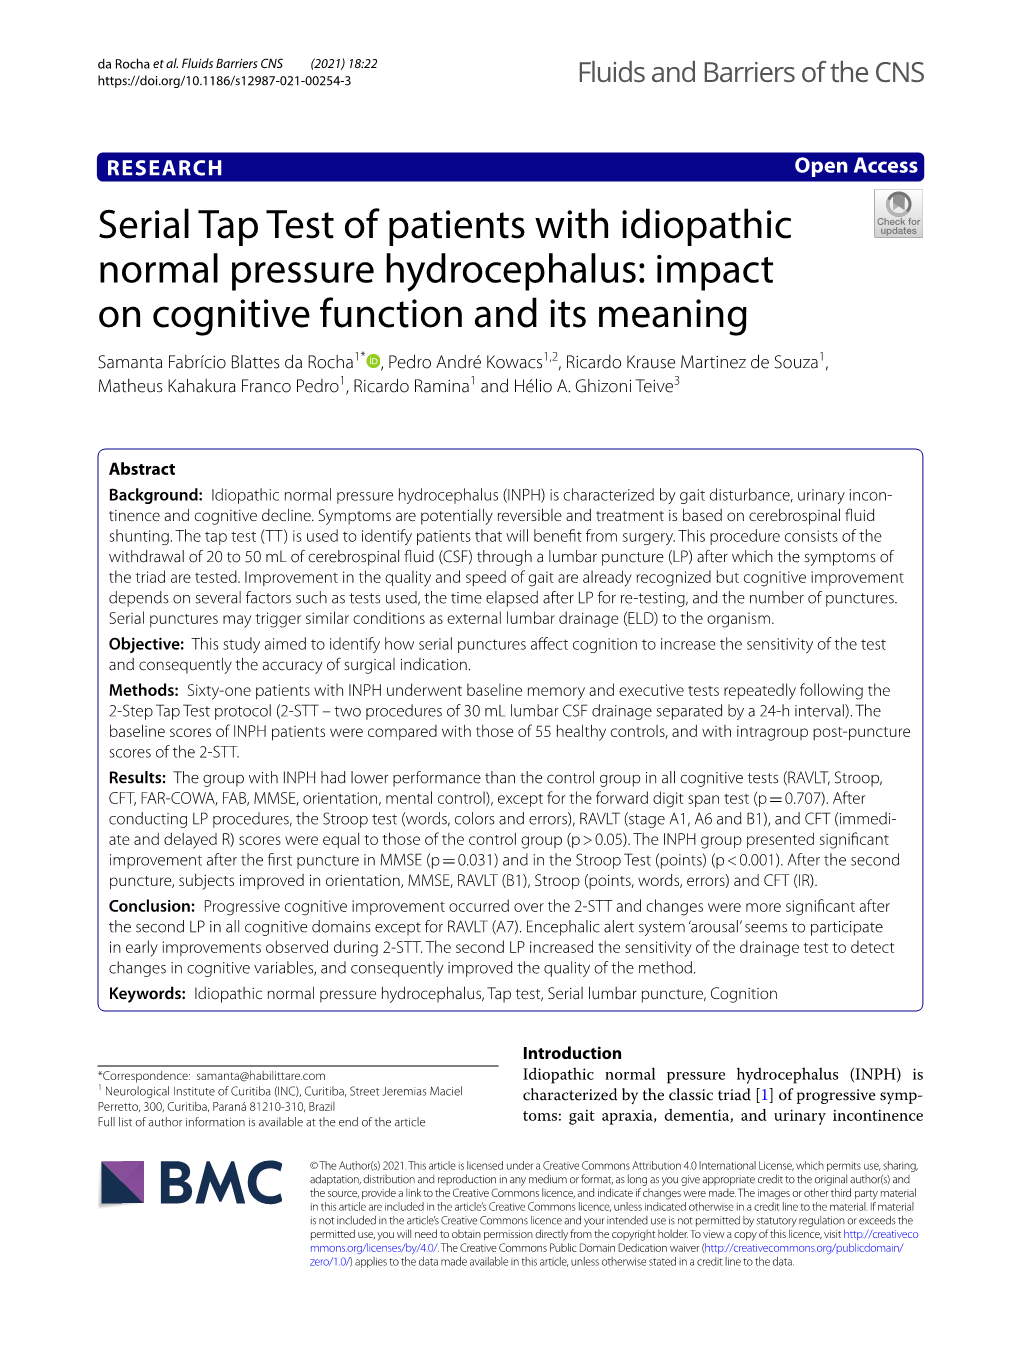 Serial Tap Test of Patients with Idiopathic Normal Pressure